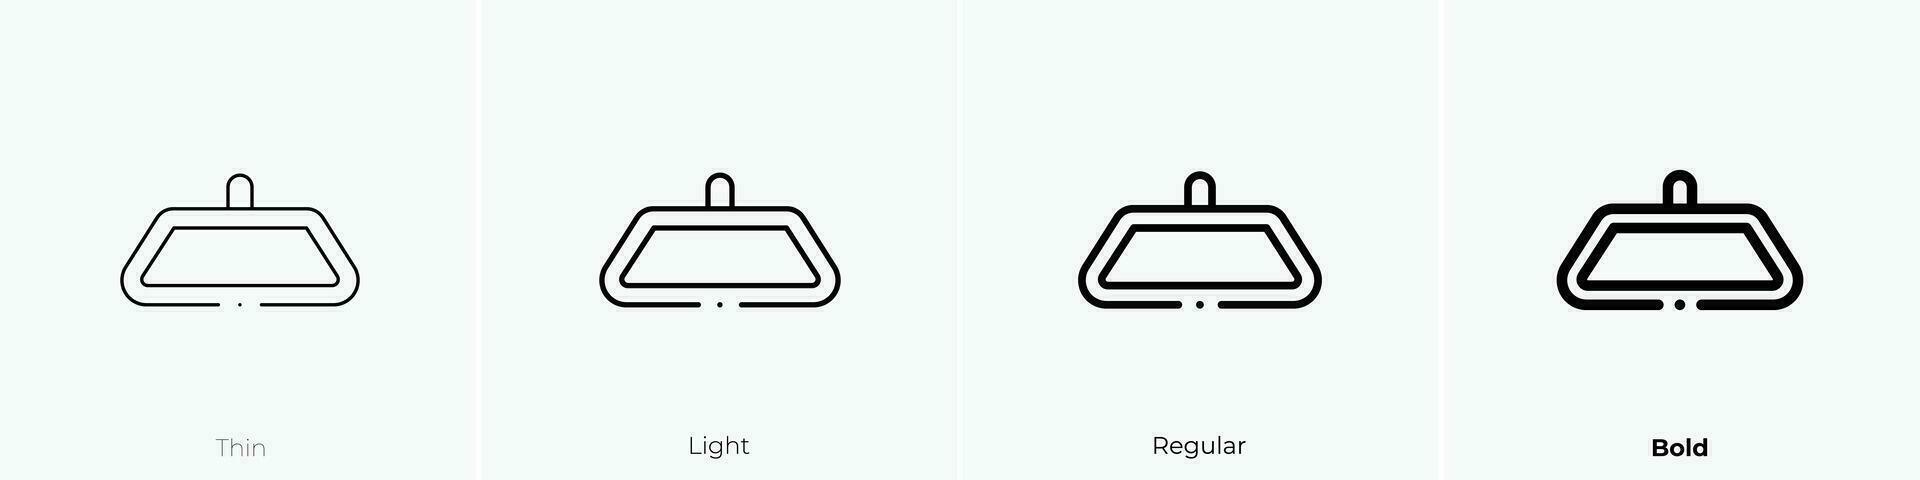 rearview mirror icon. Thin, Light, Regular And Bold style design isolated on white background vector